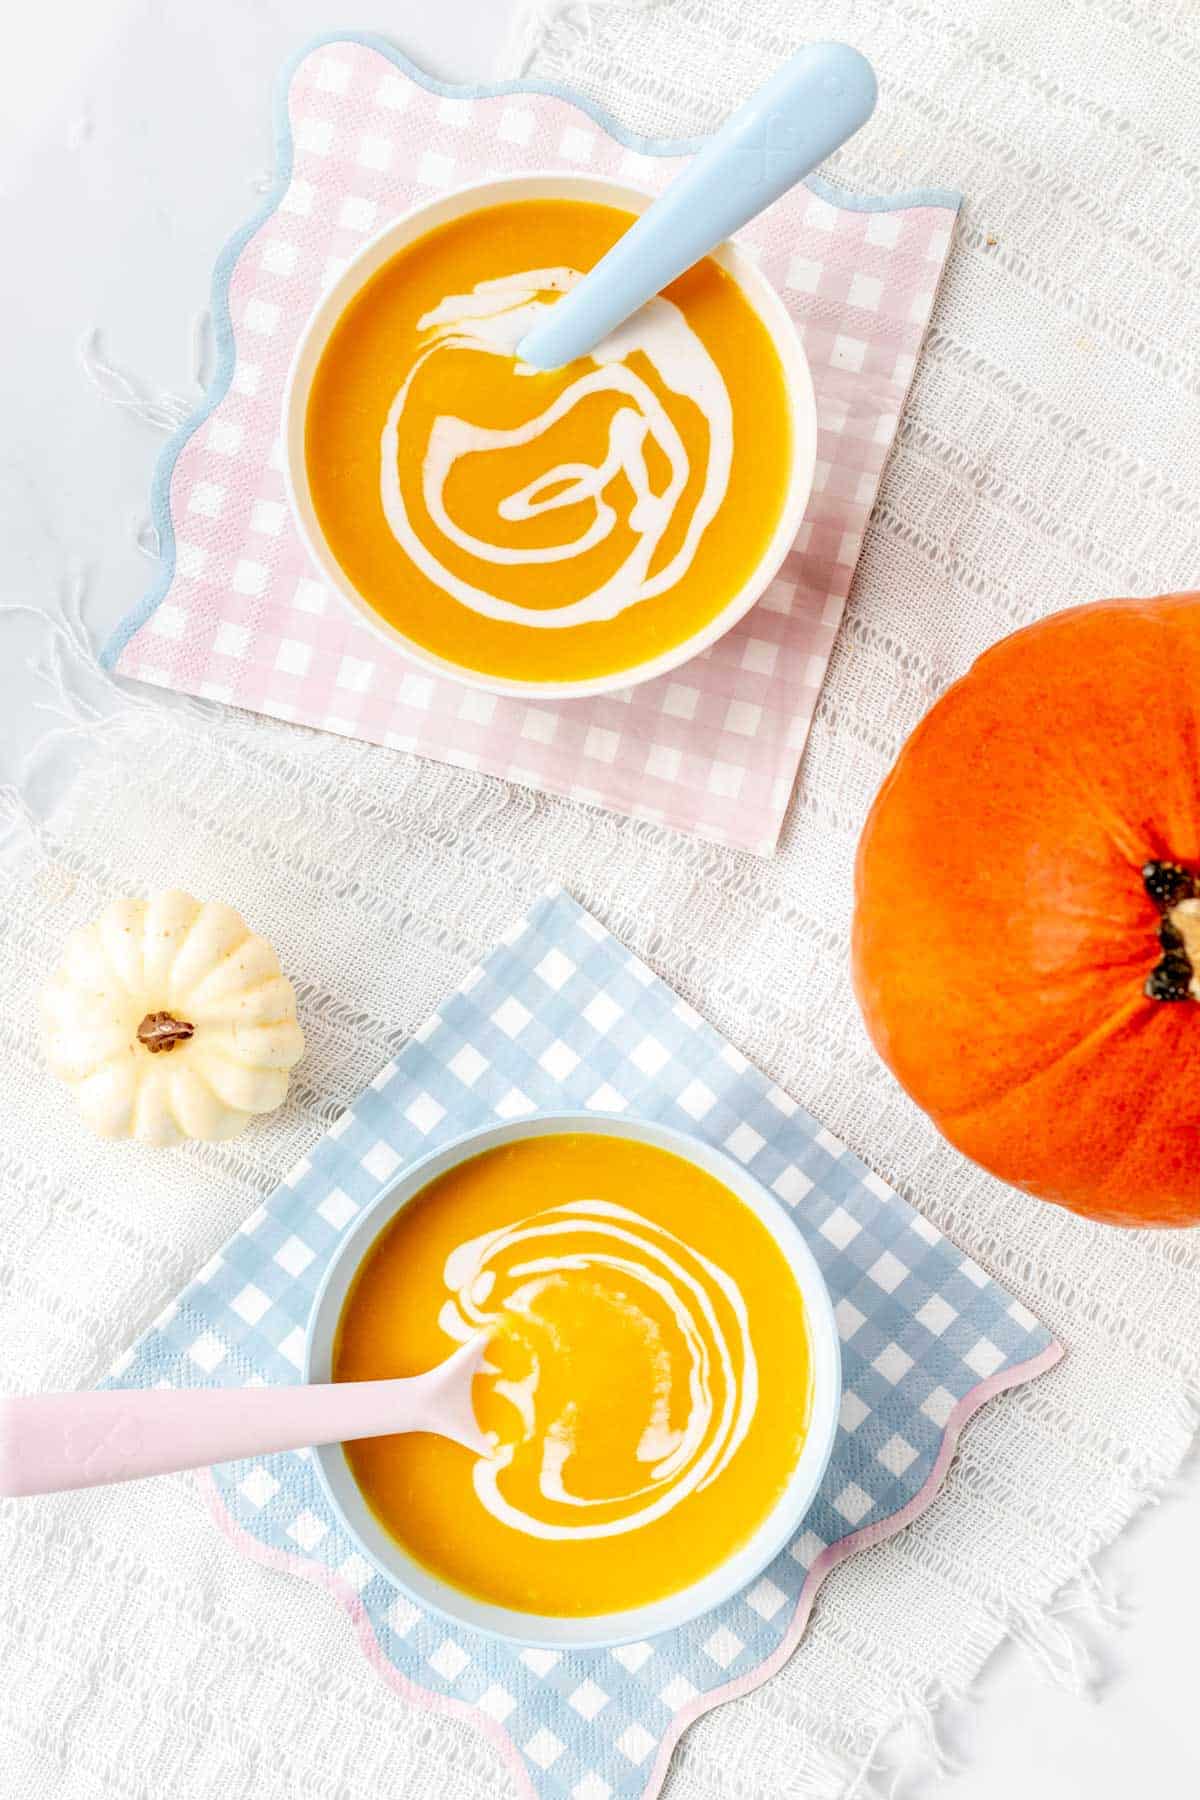 Two bowls of pumpkin soup with spoons in them on colorful napkins on a countertop, next to a pumpkin.